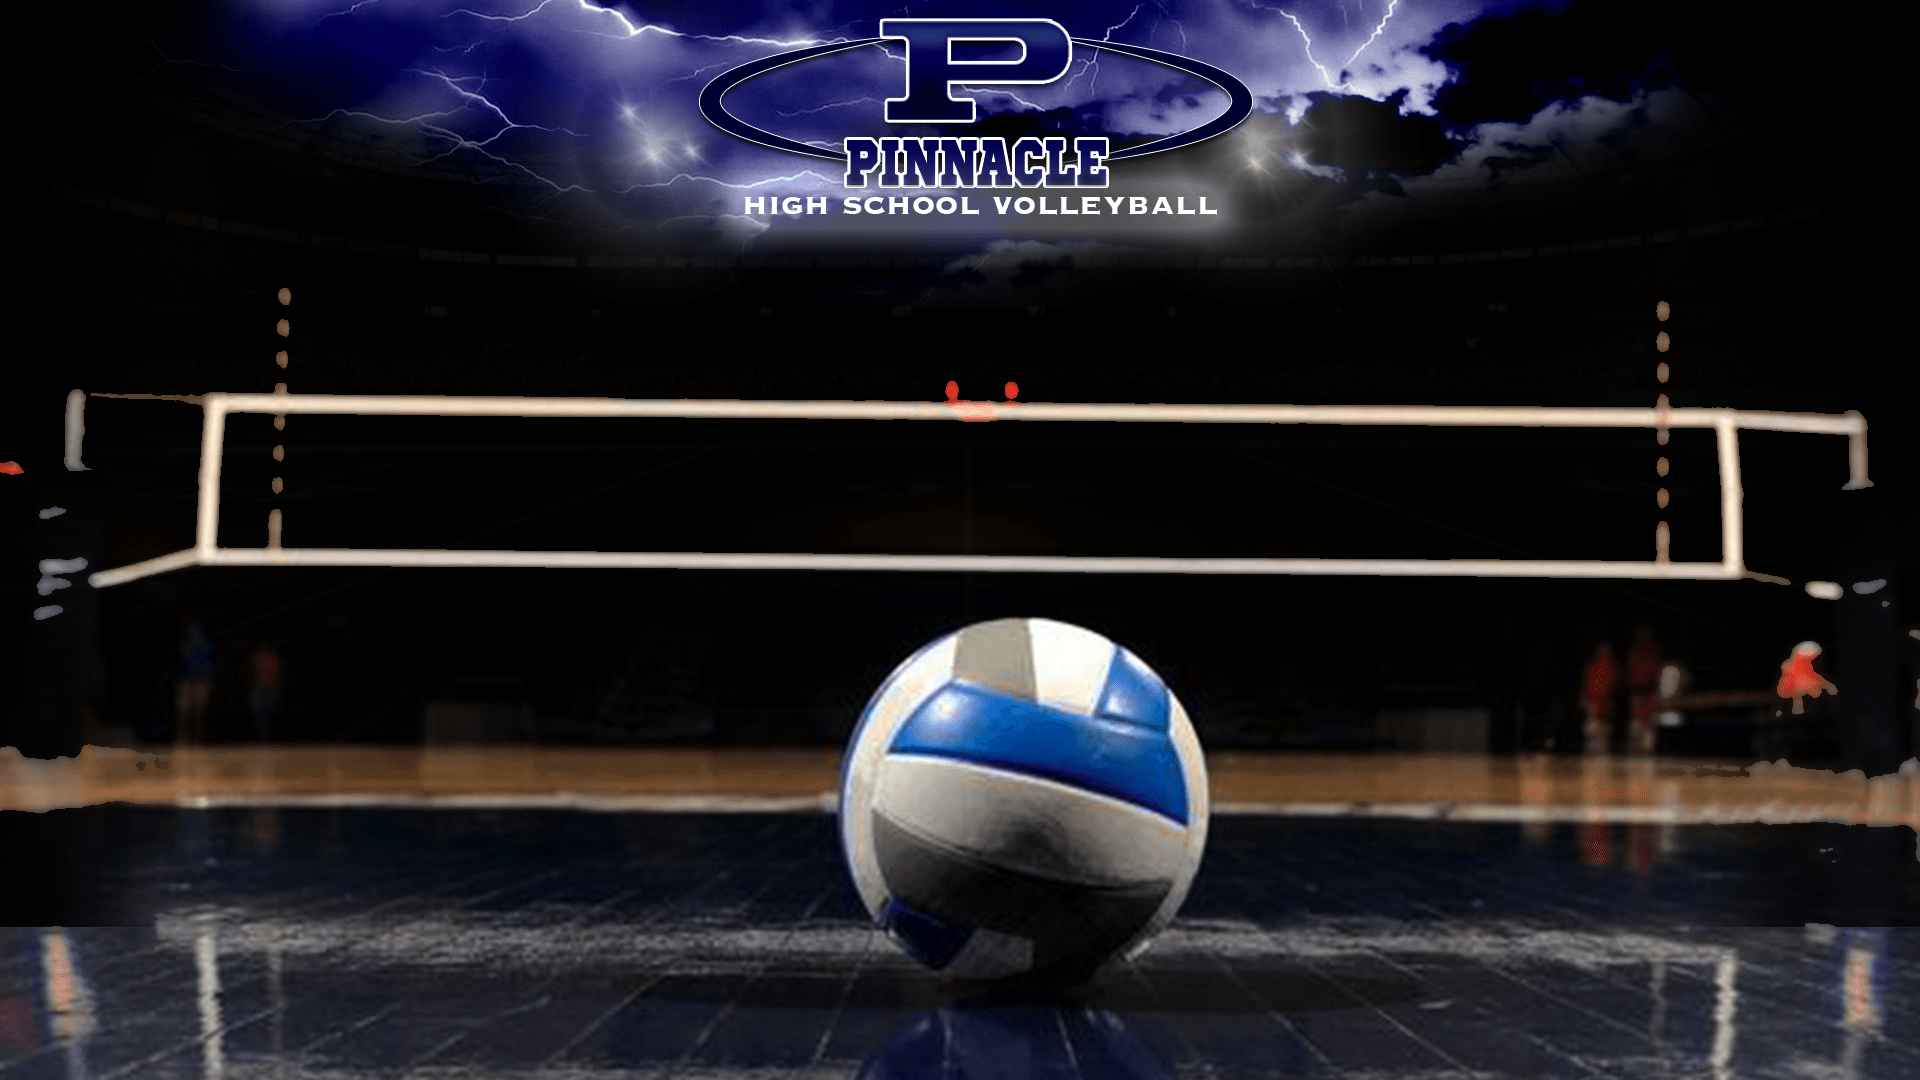 Volleyball Net Wallpapers - Top Free Volleyball Net Backgrounds ...